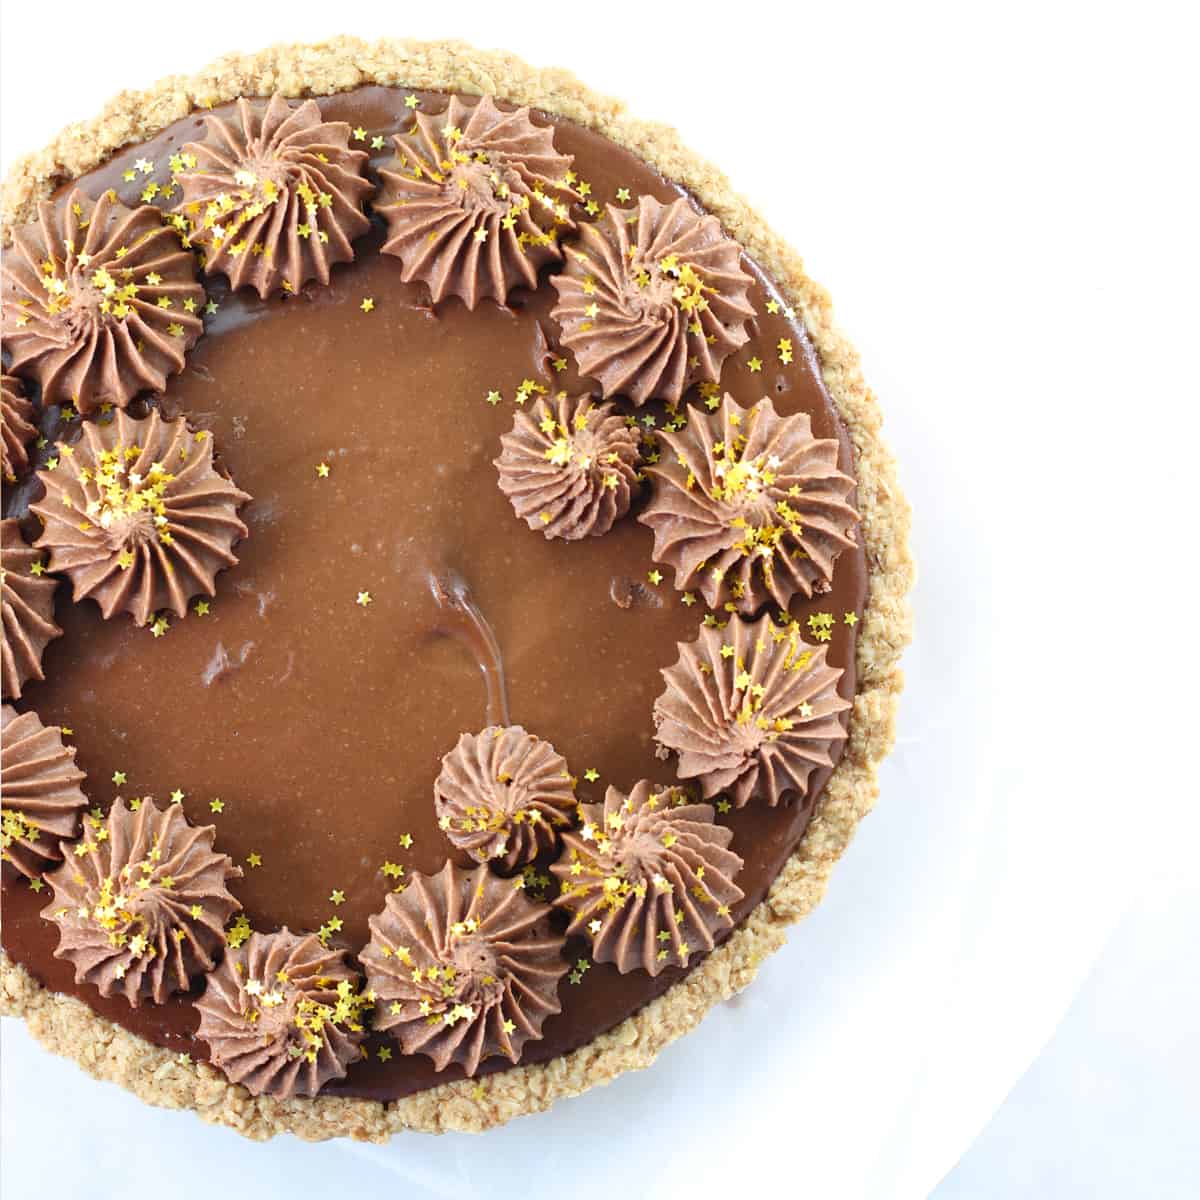 Make Filling for Chocolate Peanut Butter Pie